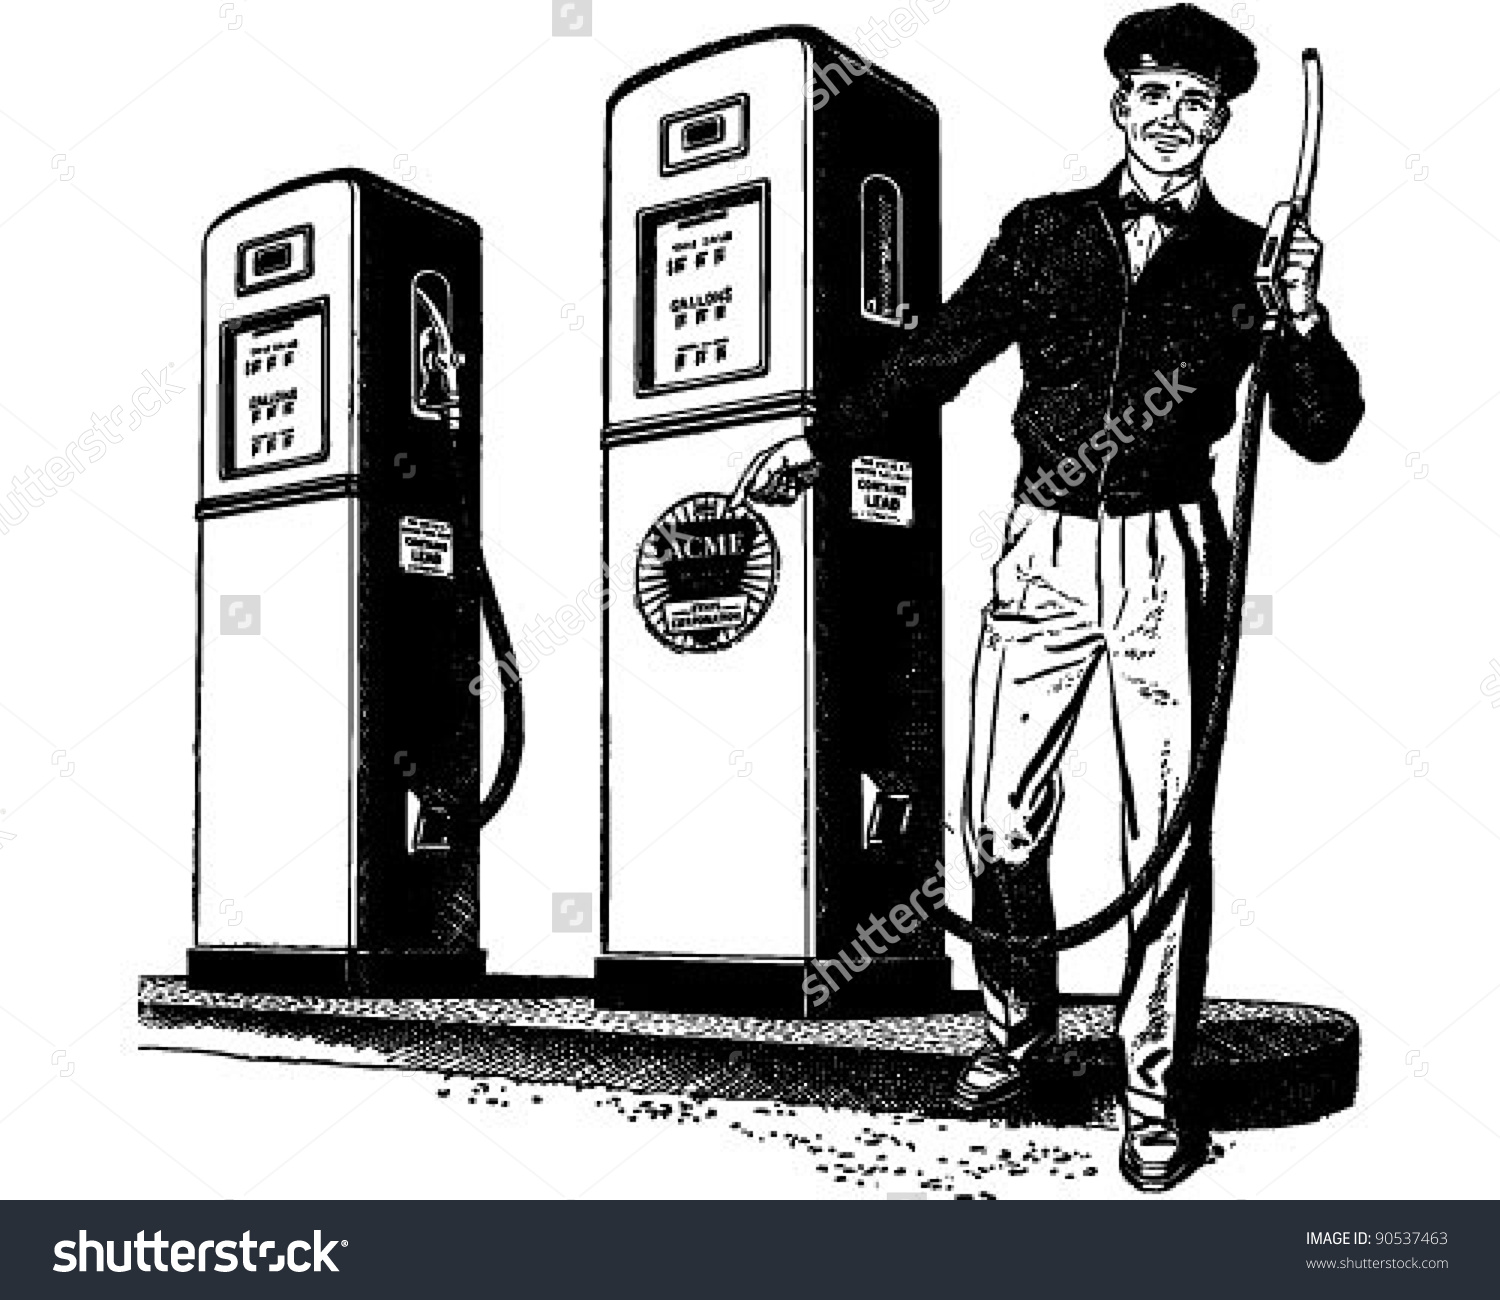 Gas stations clipart - Clipground